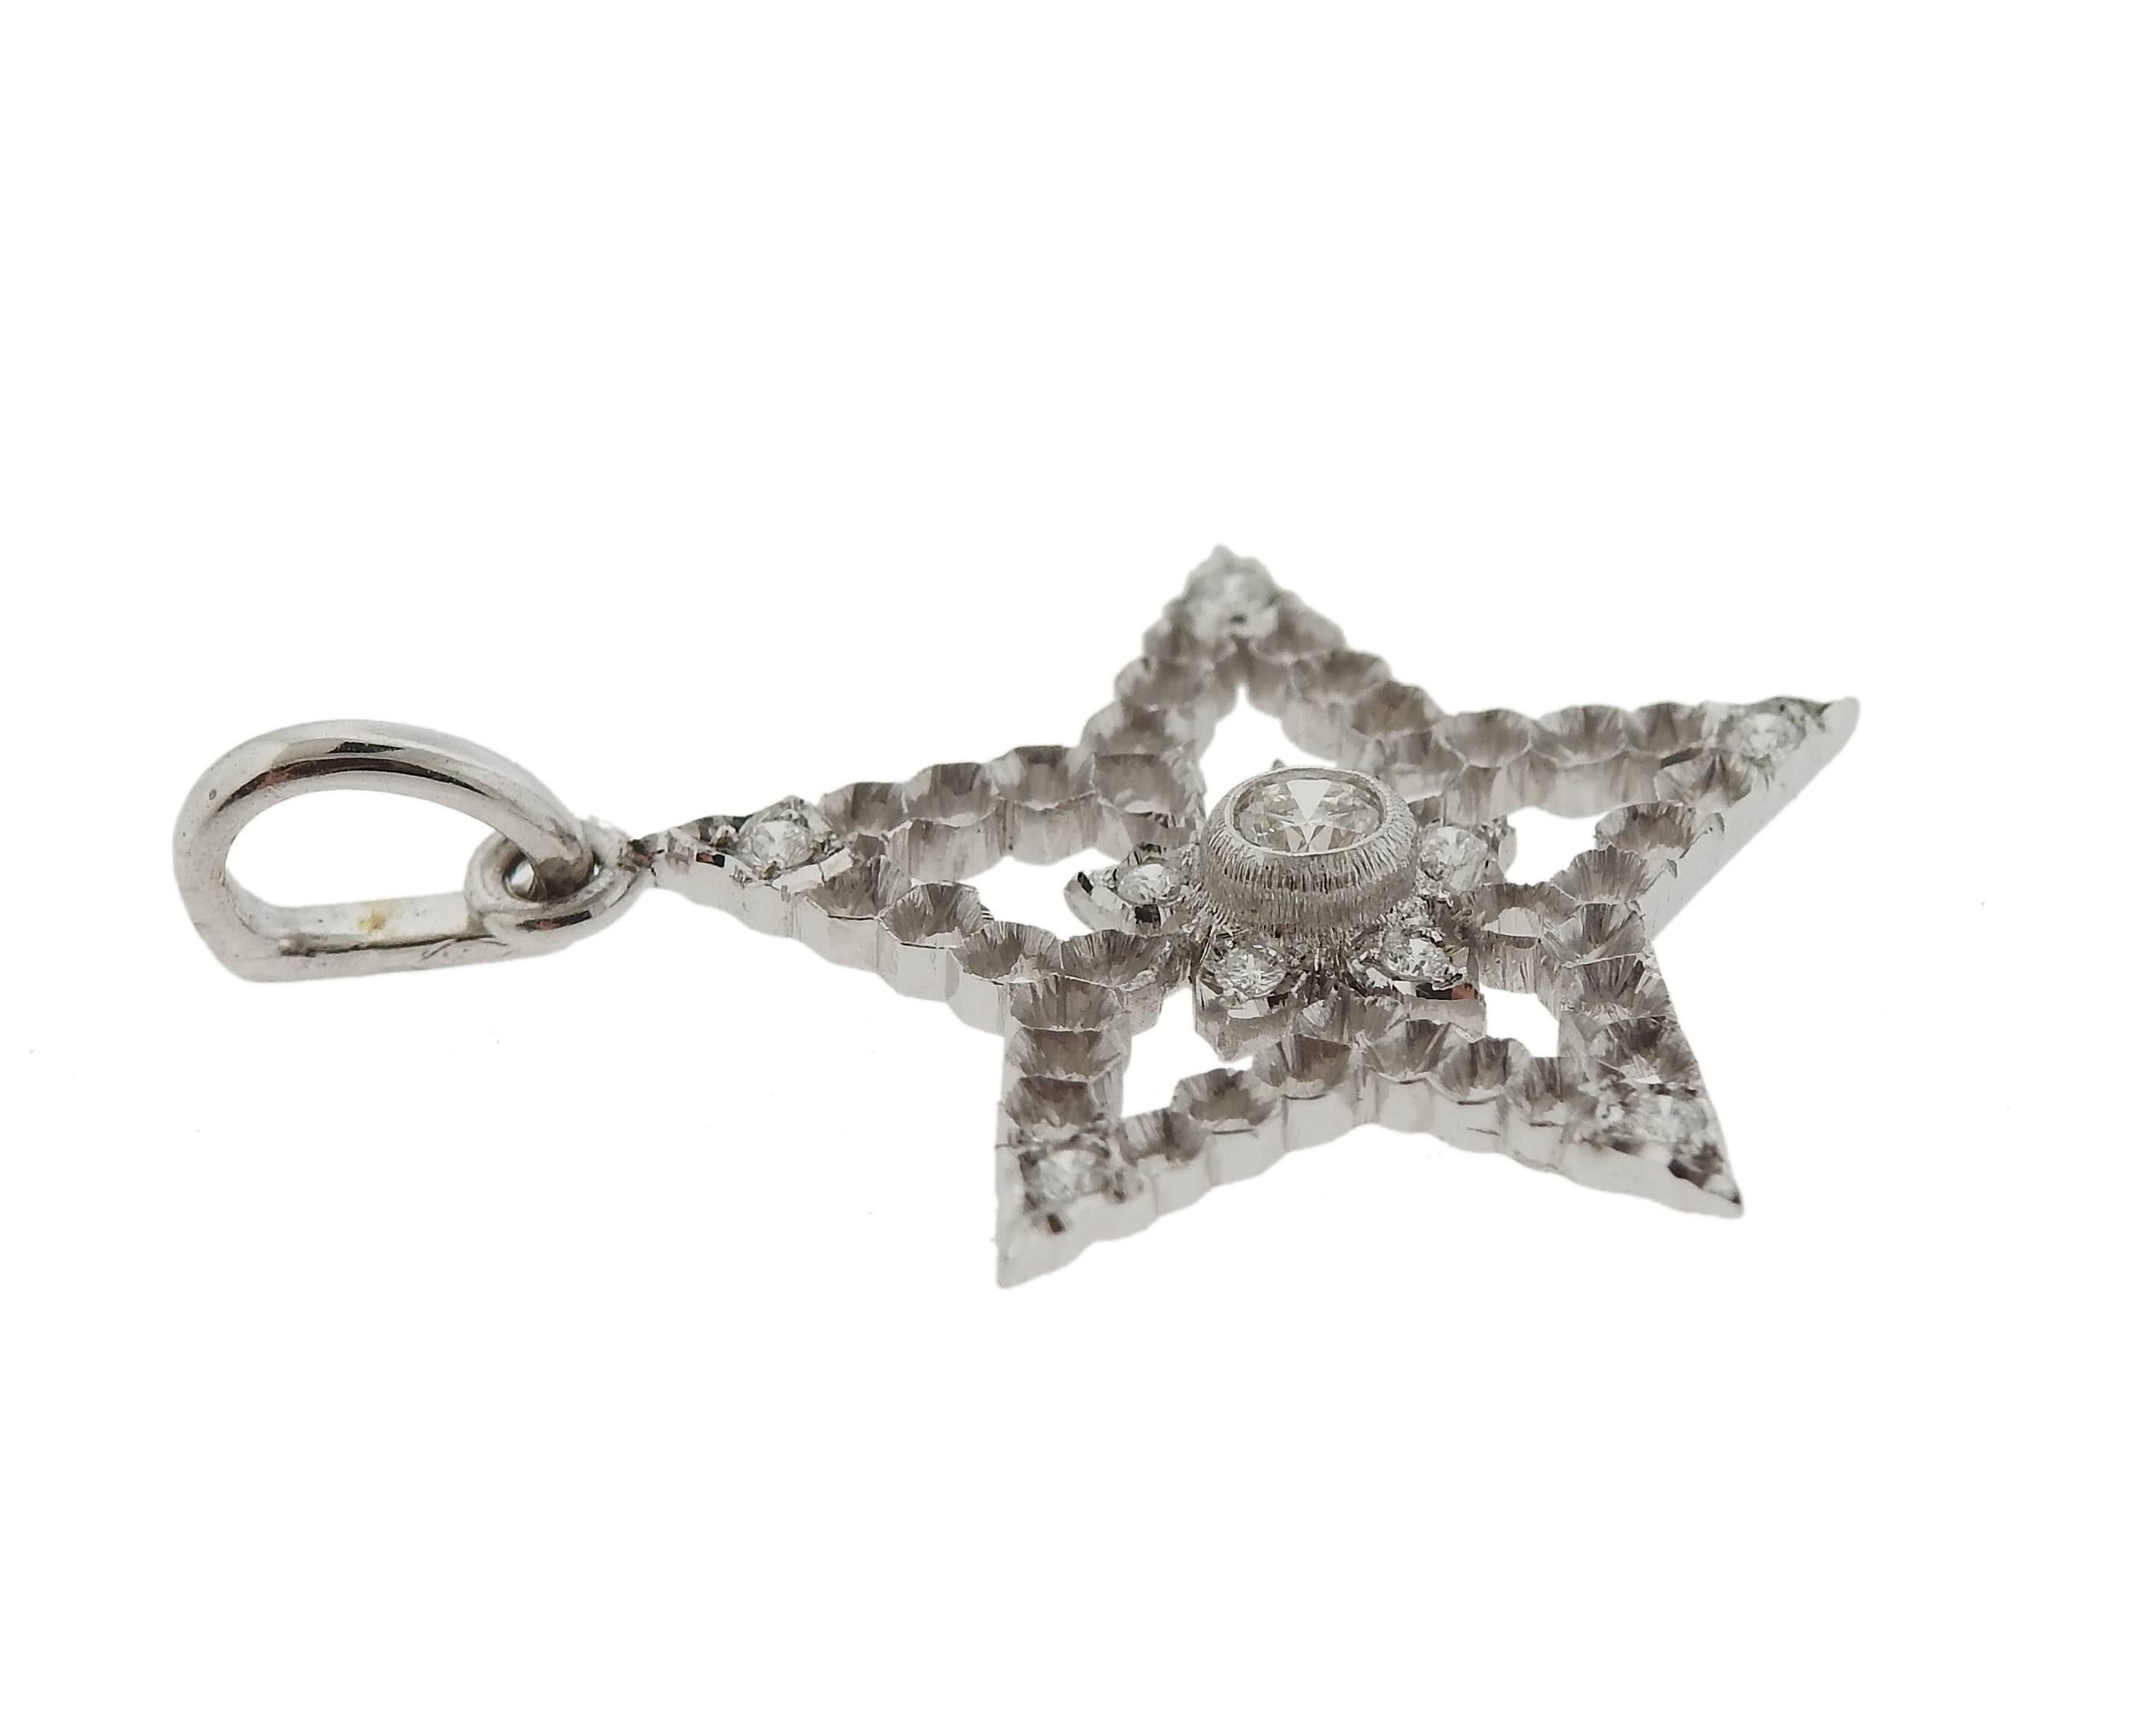 18k white gold star pendant, crafted by Buccellati, set with approximately 0.15ctw in diamonds. Pendant is 30mm long with bale x 22mm and weighs 2.4 grams. Marked: F2998, Italy 18k,  Buccellati 
Retail $3790